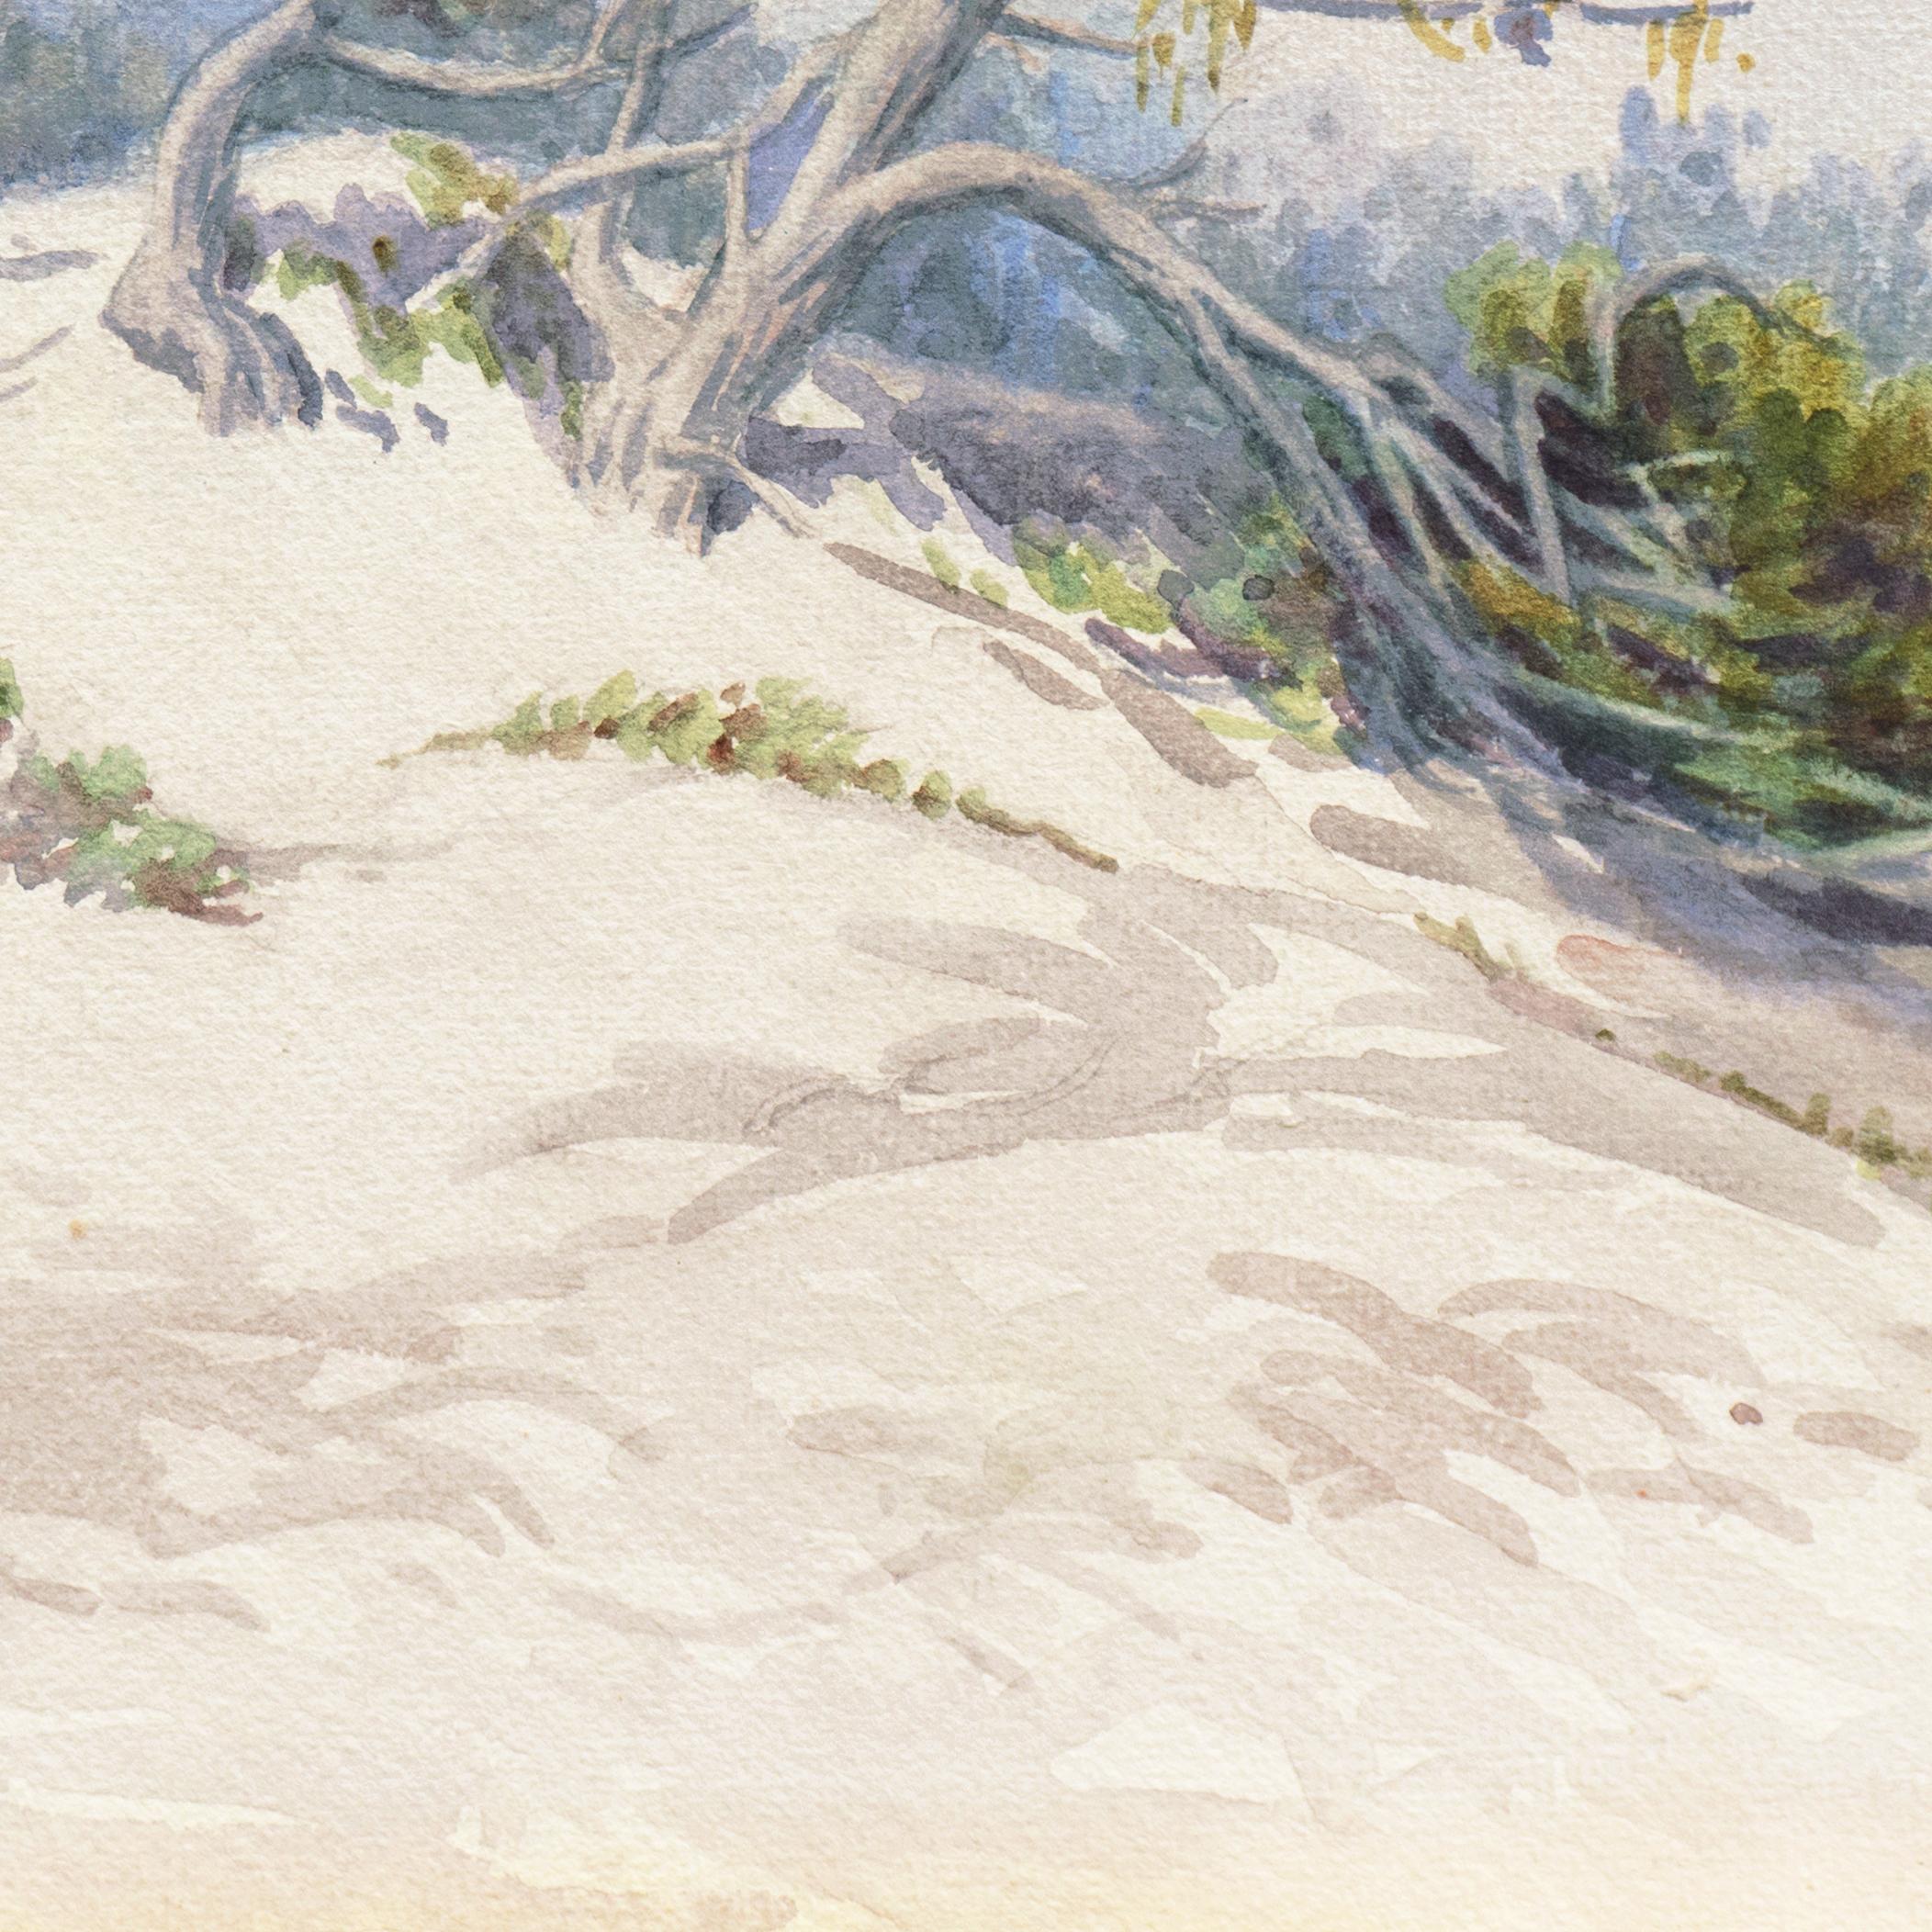 An atmospheric view of the sand dunes outside Carmel with Cypresses growing amidst the heather. Signed lower left, 'W.E. Chamberlin' for Winnie Chamberlin (American, 1878-1953) and painted circa 1915.

Born in New York in 1878. Chamberlin moved to